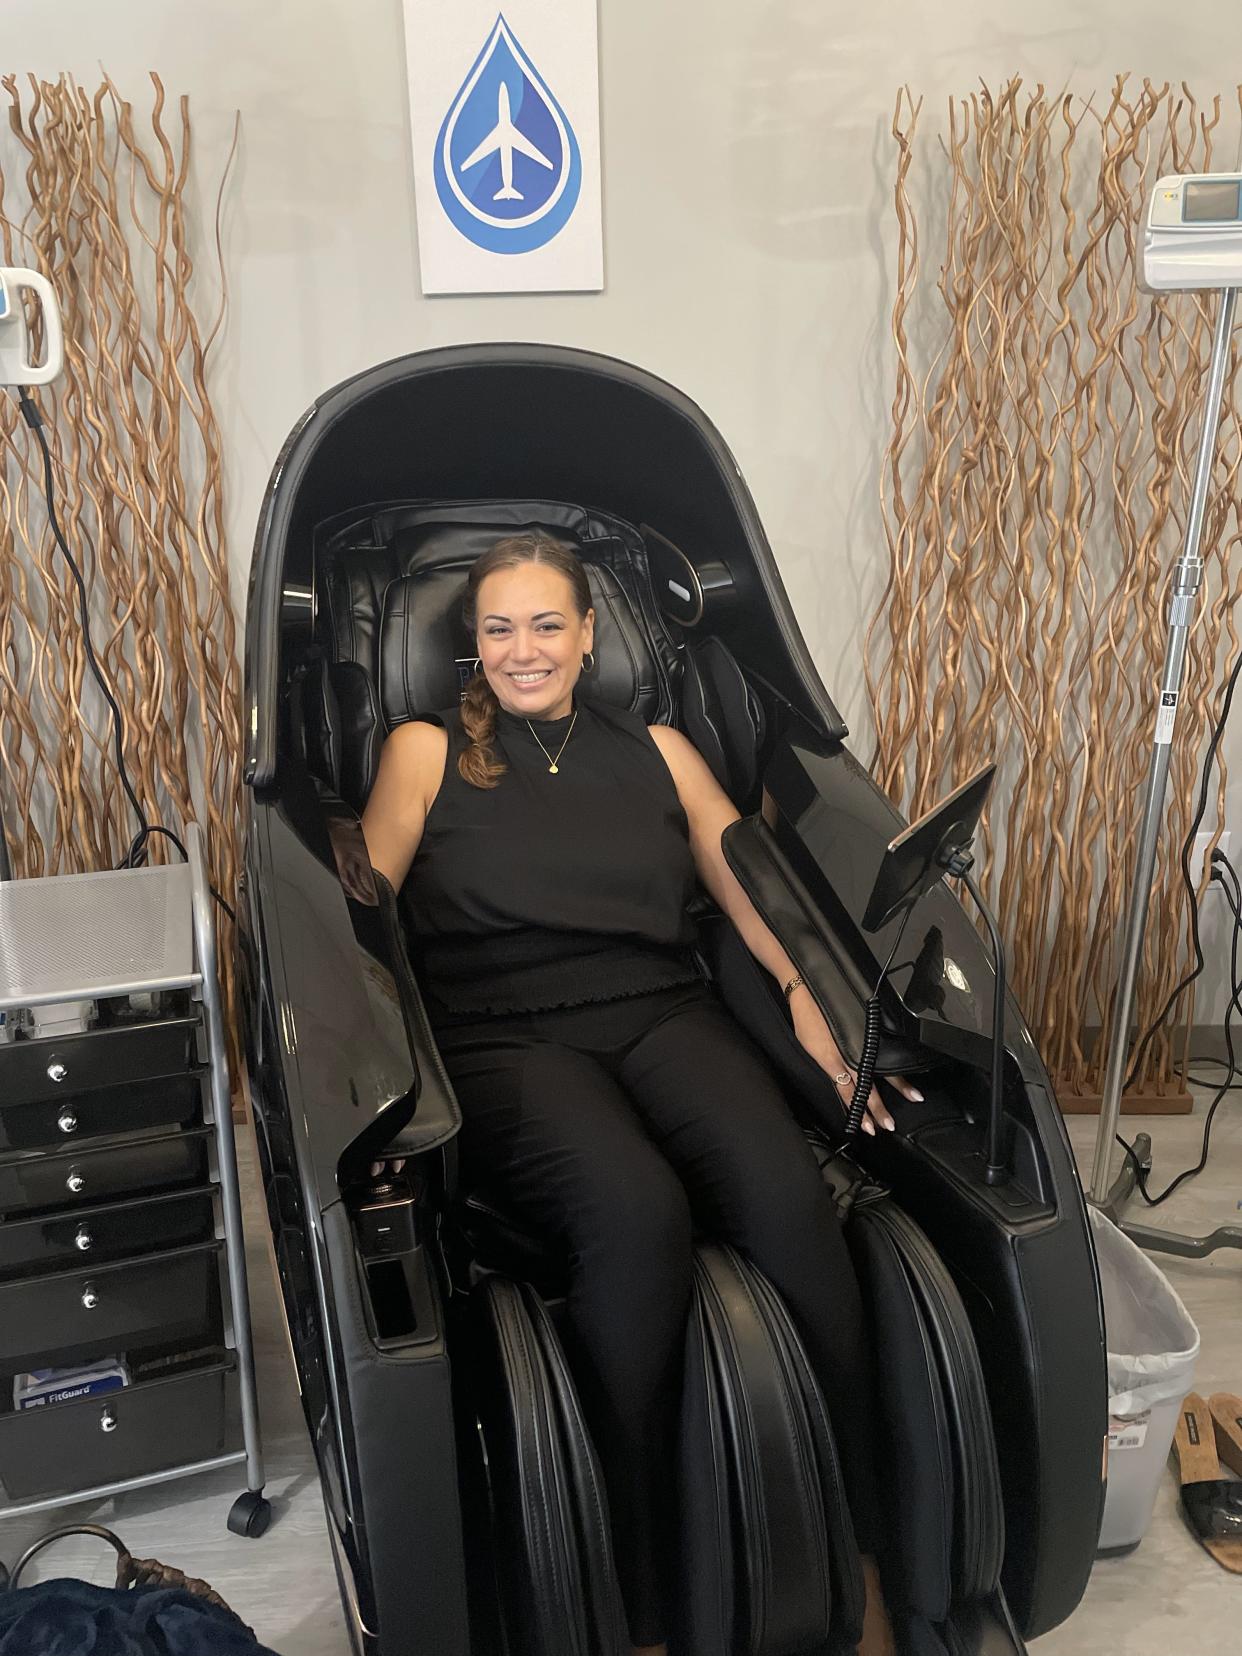 After undergoing her first intravenous therapy treatment at Prime IV in Palm Beach Gardens last month, 46-year-old Liz Leon said “I felt a difference the very next day. I had a good night’s sleep and felt full of energy in the morning.”